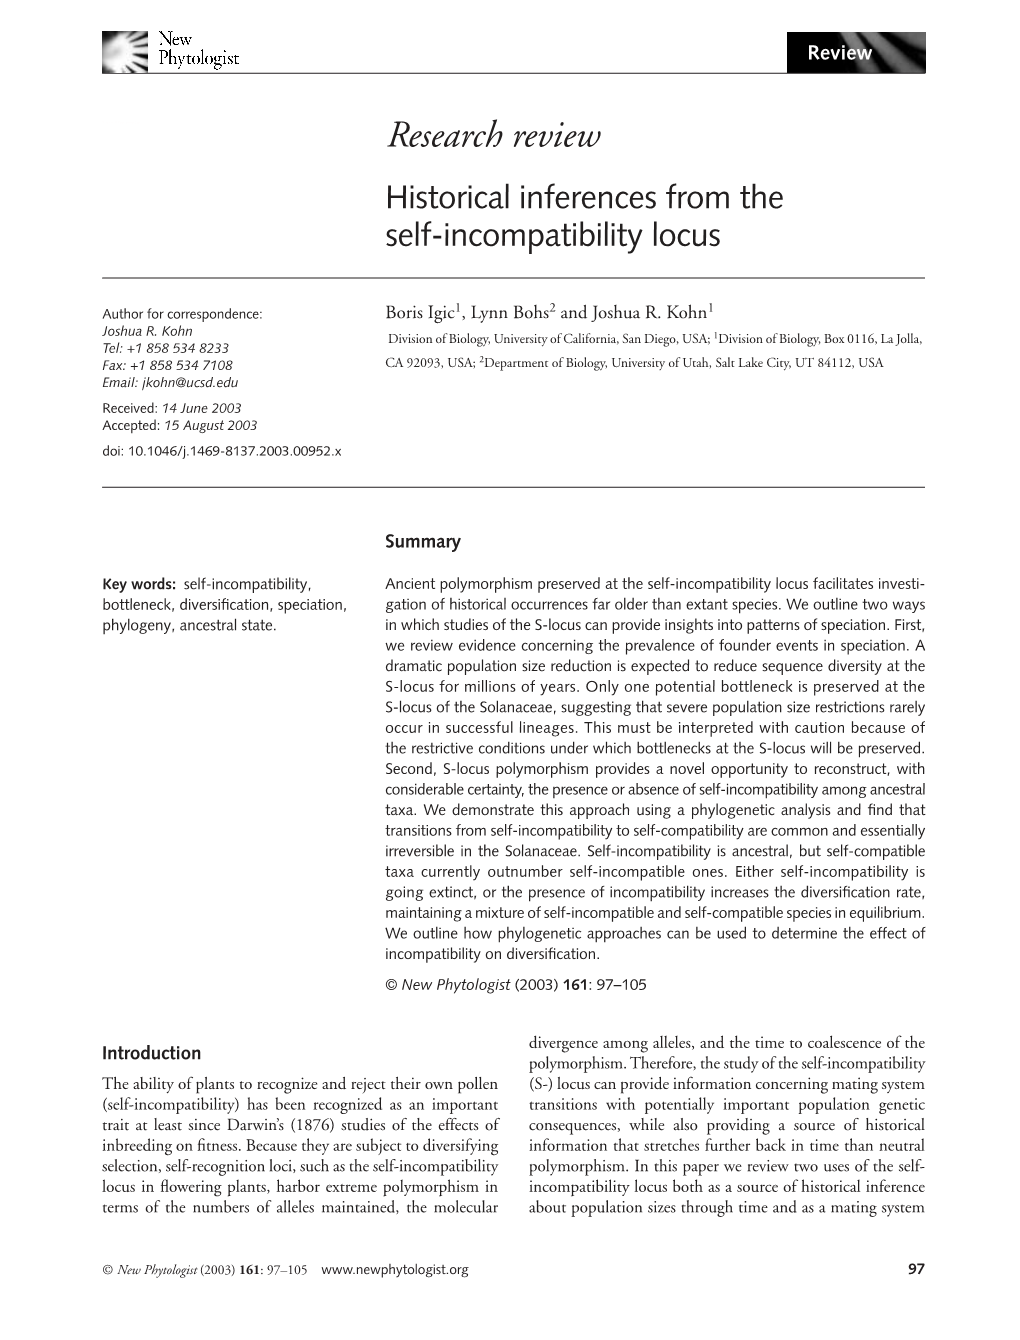 Research Review Historical Inferences from the Self-Incompatibility Locus